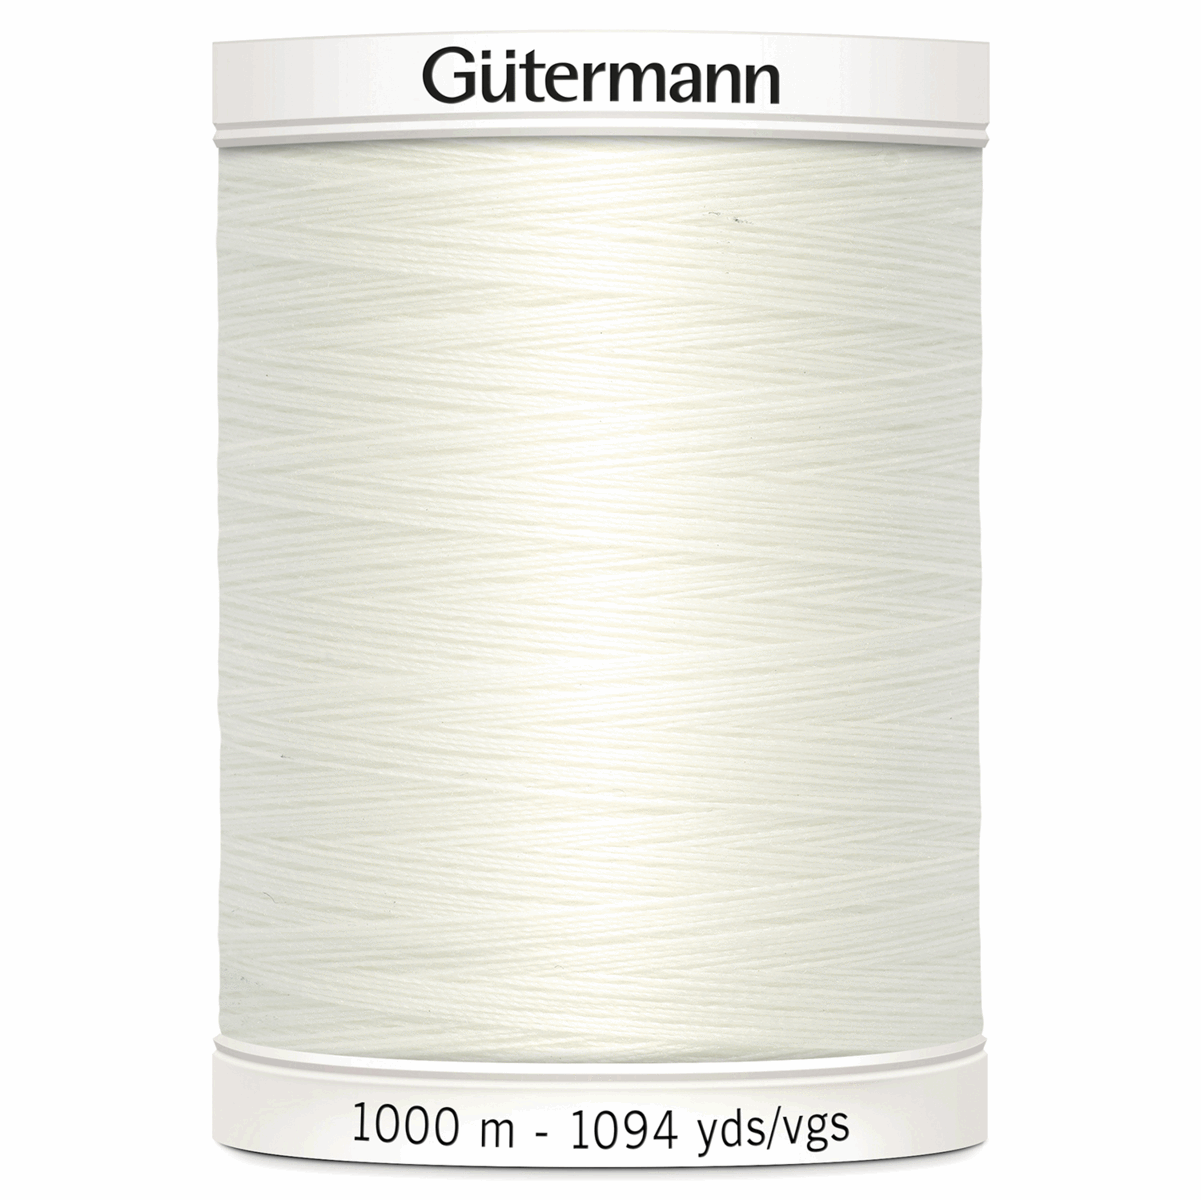 1000m size reel of Gutermann Sew All Polyester Sewing Thread, 111 Off White from Jaycotts 